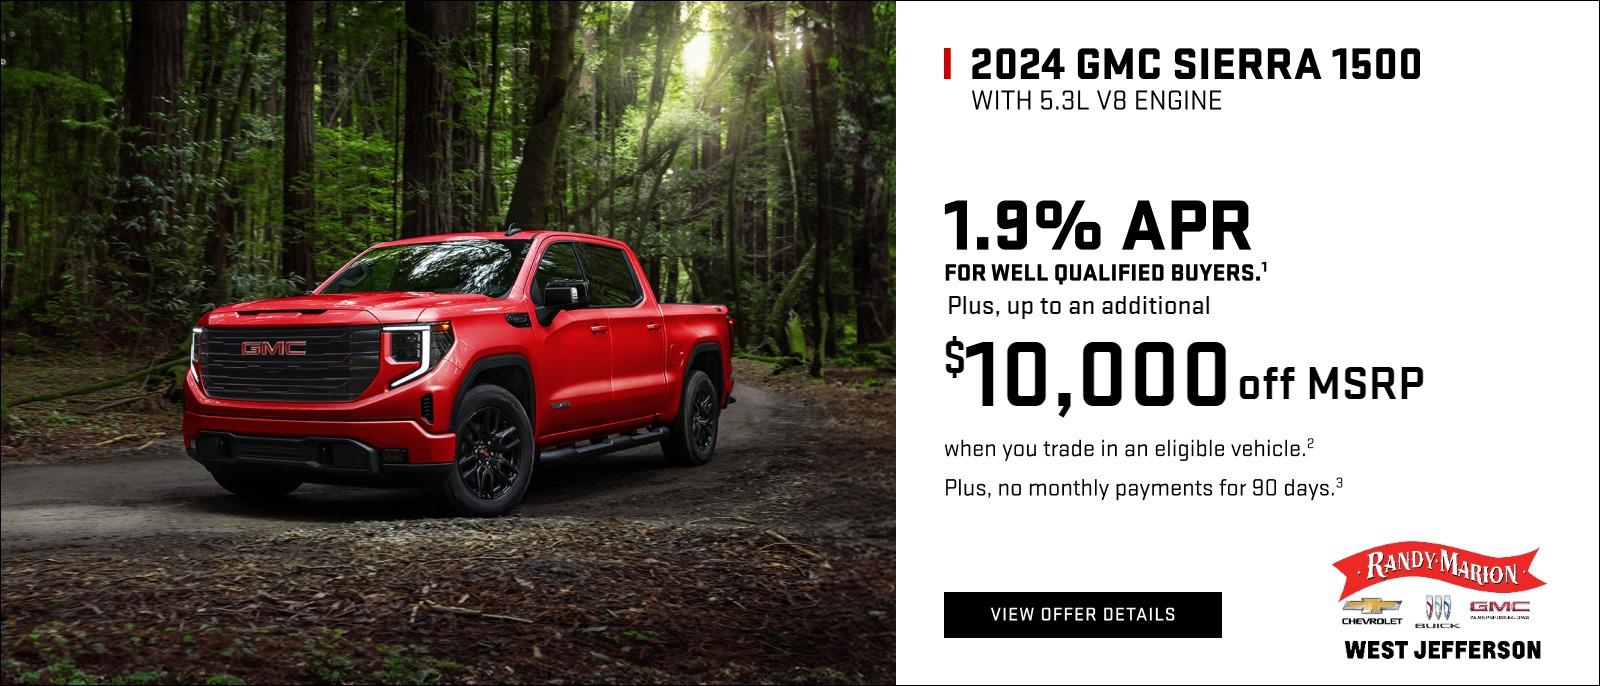 SAVE BIG ON 2024 GMC SIERRA 1500 MODELS AT RANDY MARION CHEVROLET BUICK GMC OF WEST JEFFERSON